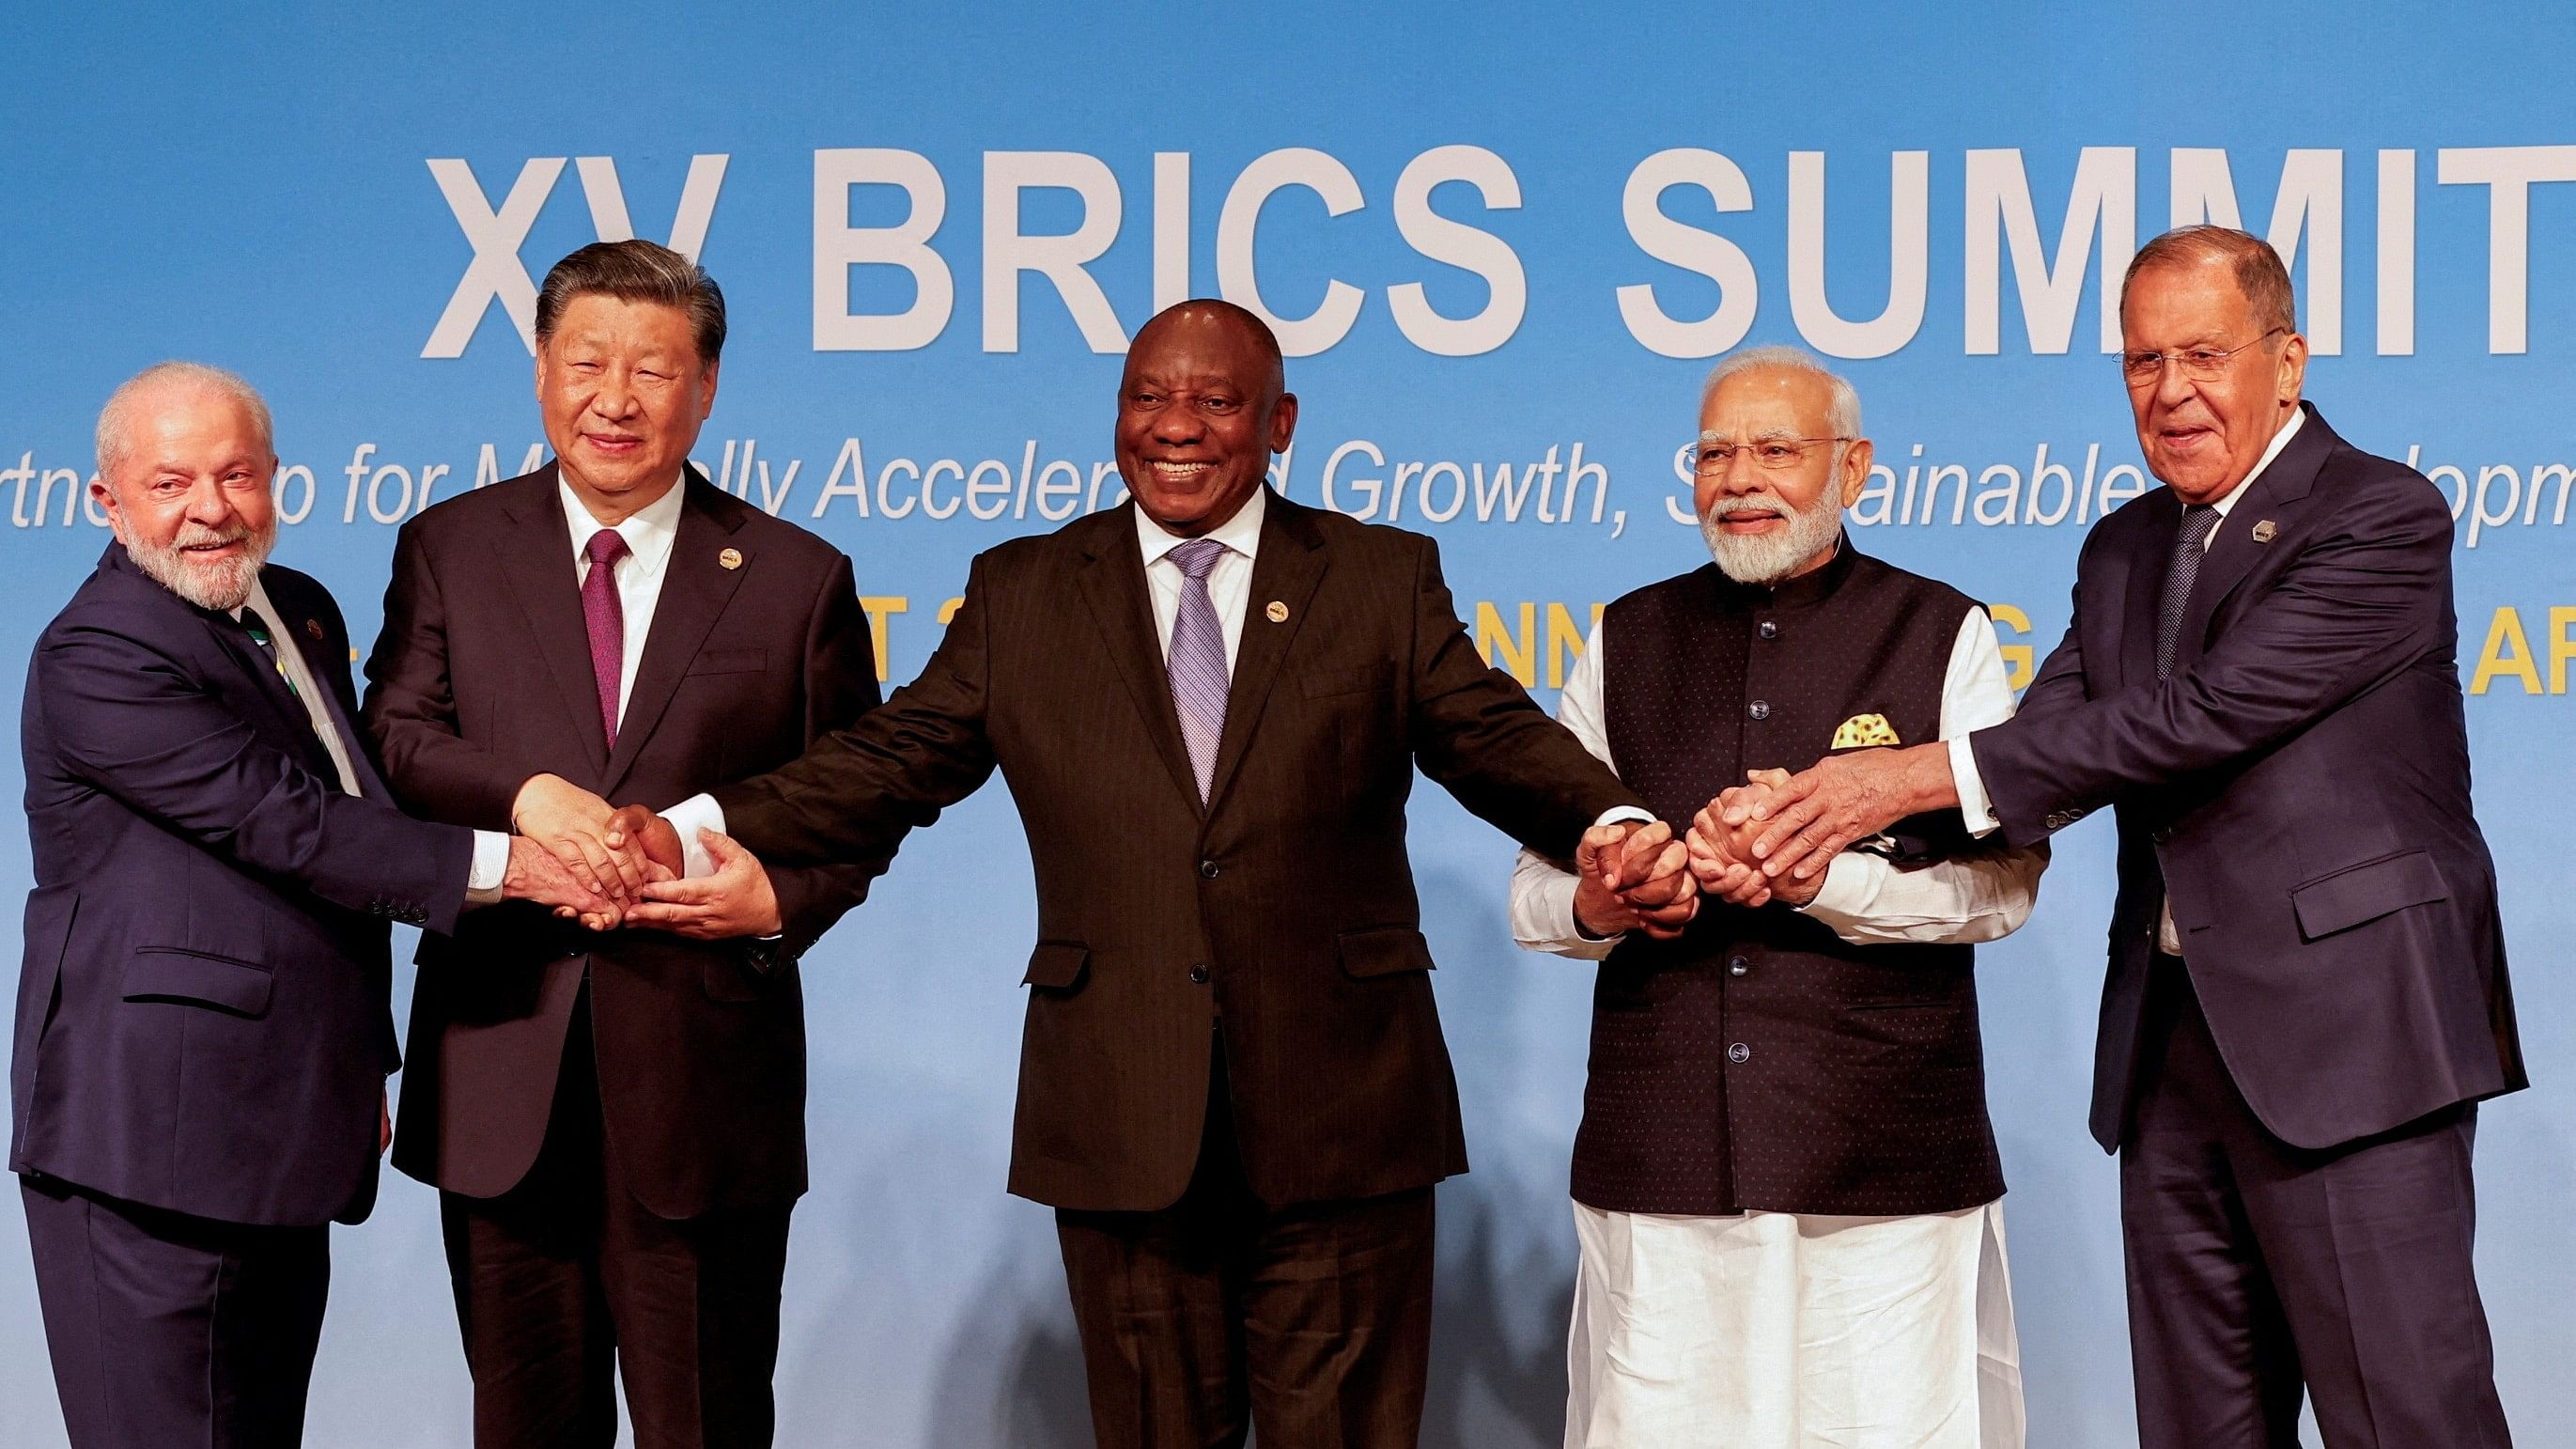 <div class="paragraphs"><p>Brazil President Luiz Inacio Lula da Silva, China President Xi Jinping, South African President Cyril Ramaphosa, Prime Minister Narendra Modi and Russia’s Foreign Minister Sergey Lavrov at the BRICS Summit held in Johannesburg, South Africa. </p></div>